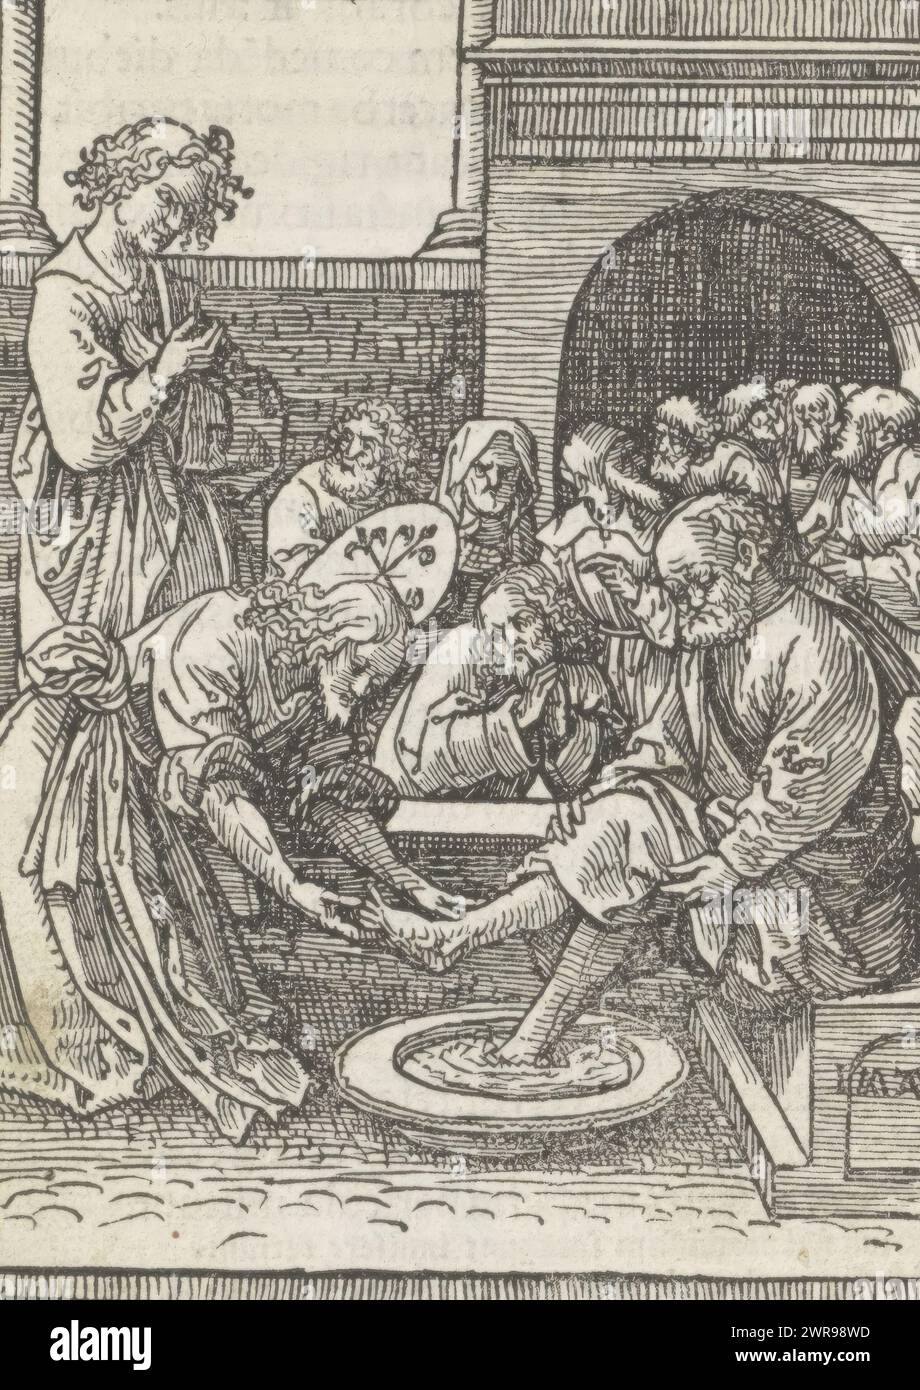 Washing of Peter's feet, The Little Passion (series title), Christ washes Peter's feet. The other disciples watch. Print is part of a book., print maker: Jacob Cornelisz van Oostsanen, publisher: Doen Pietersz., Amsterdam, 1523, paper, height 112 mm × width 80 mm, height 141 mm × width 101 mm, print Stock Photo